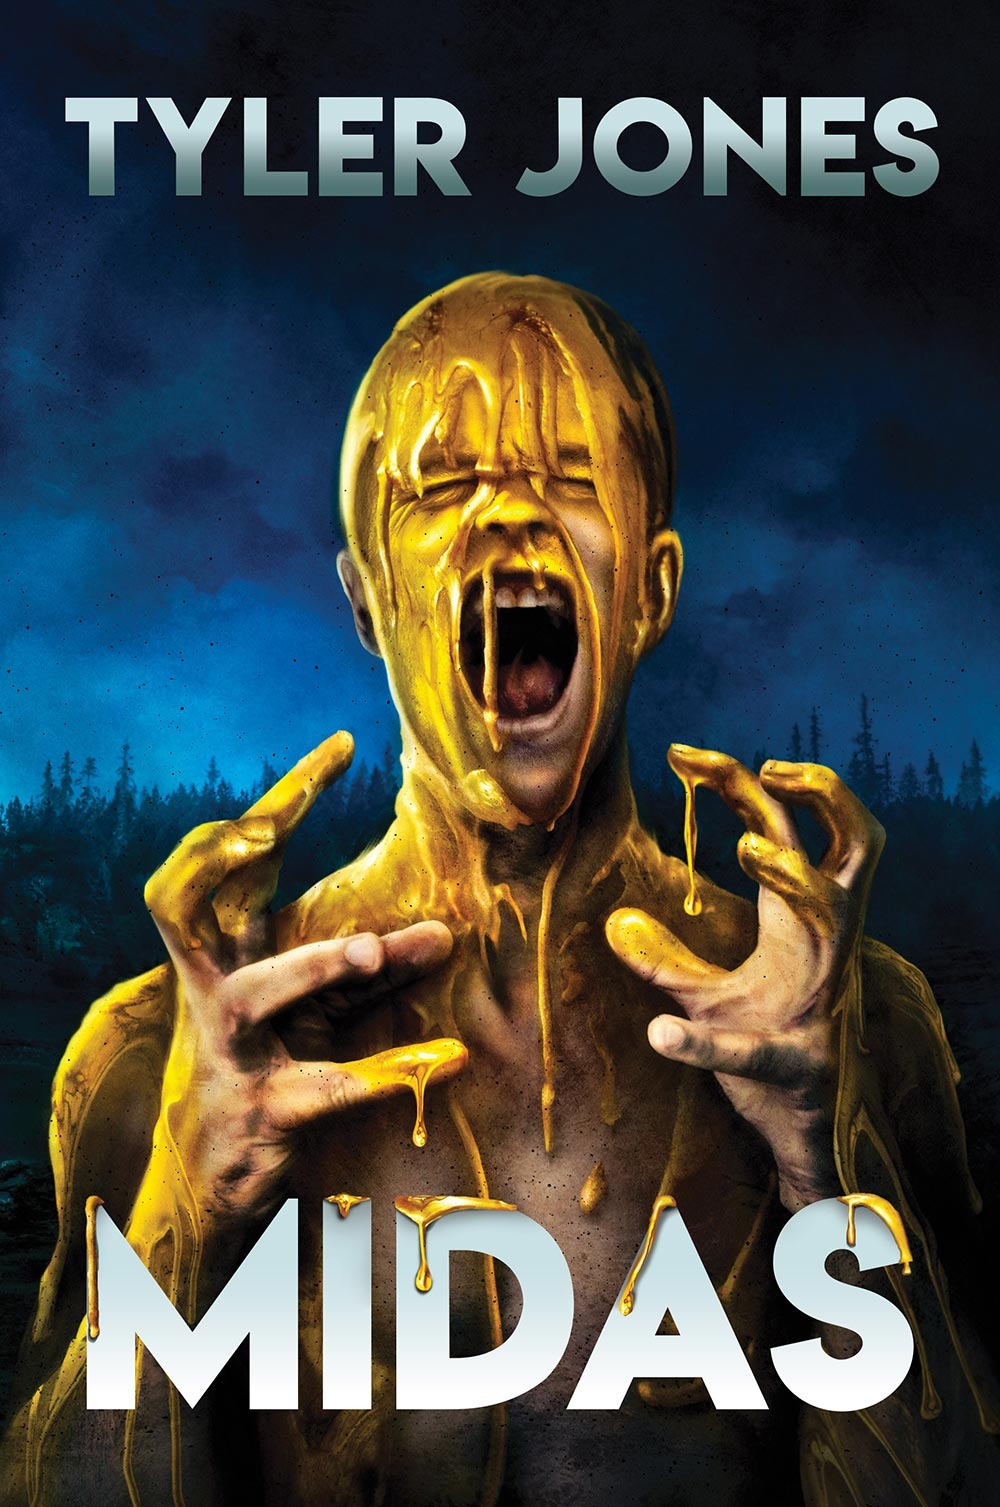 Midas by Tyler Jones Signed & Numbered Hardcover (PREORDER)